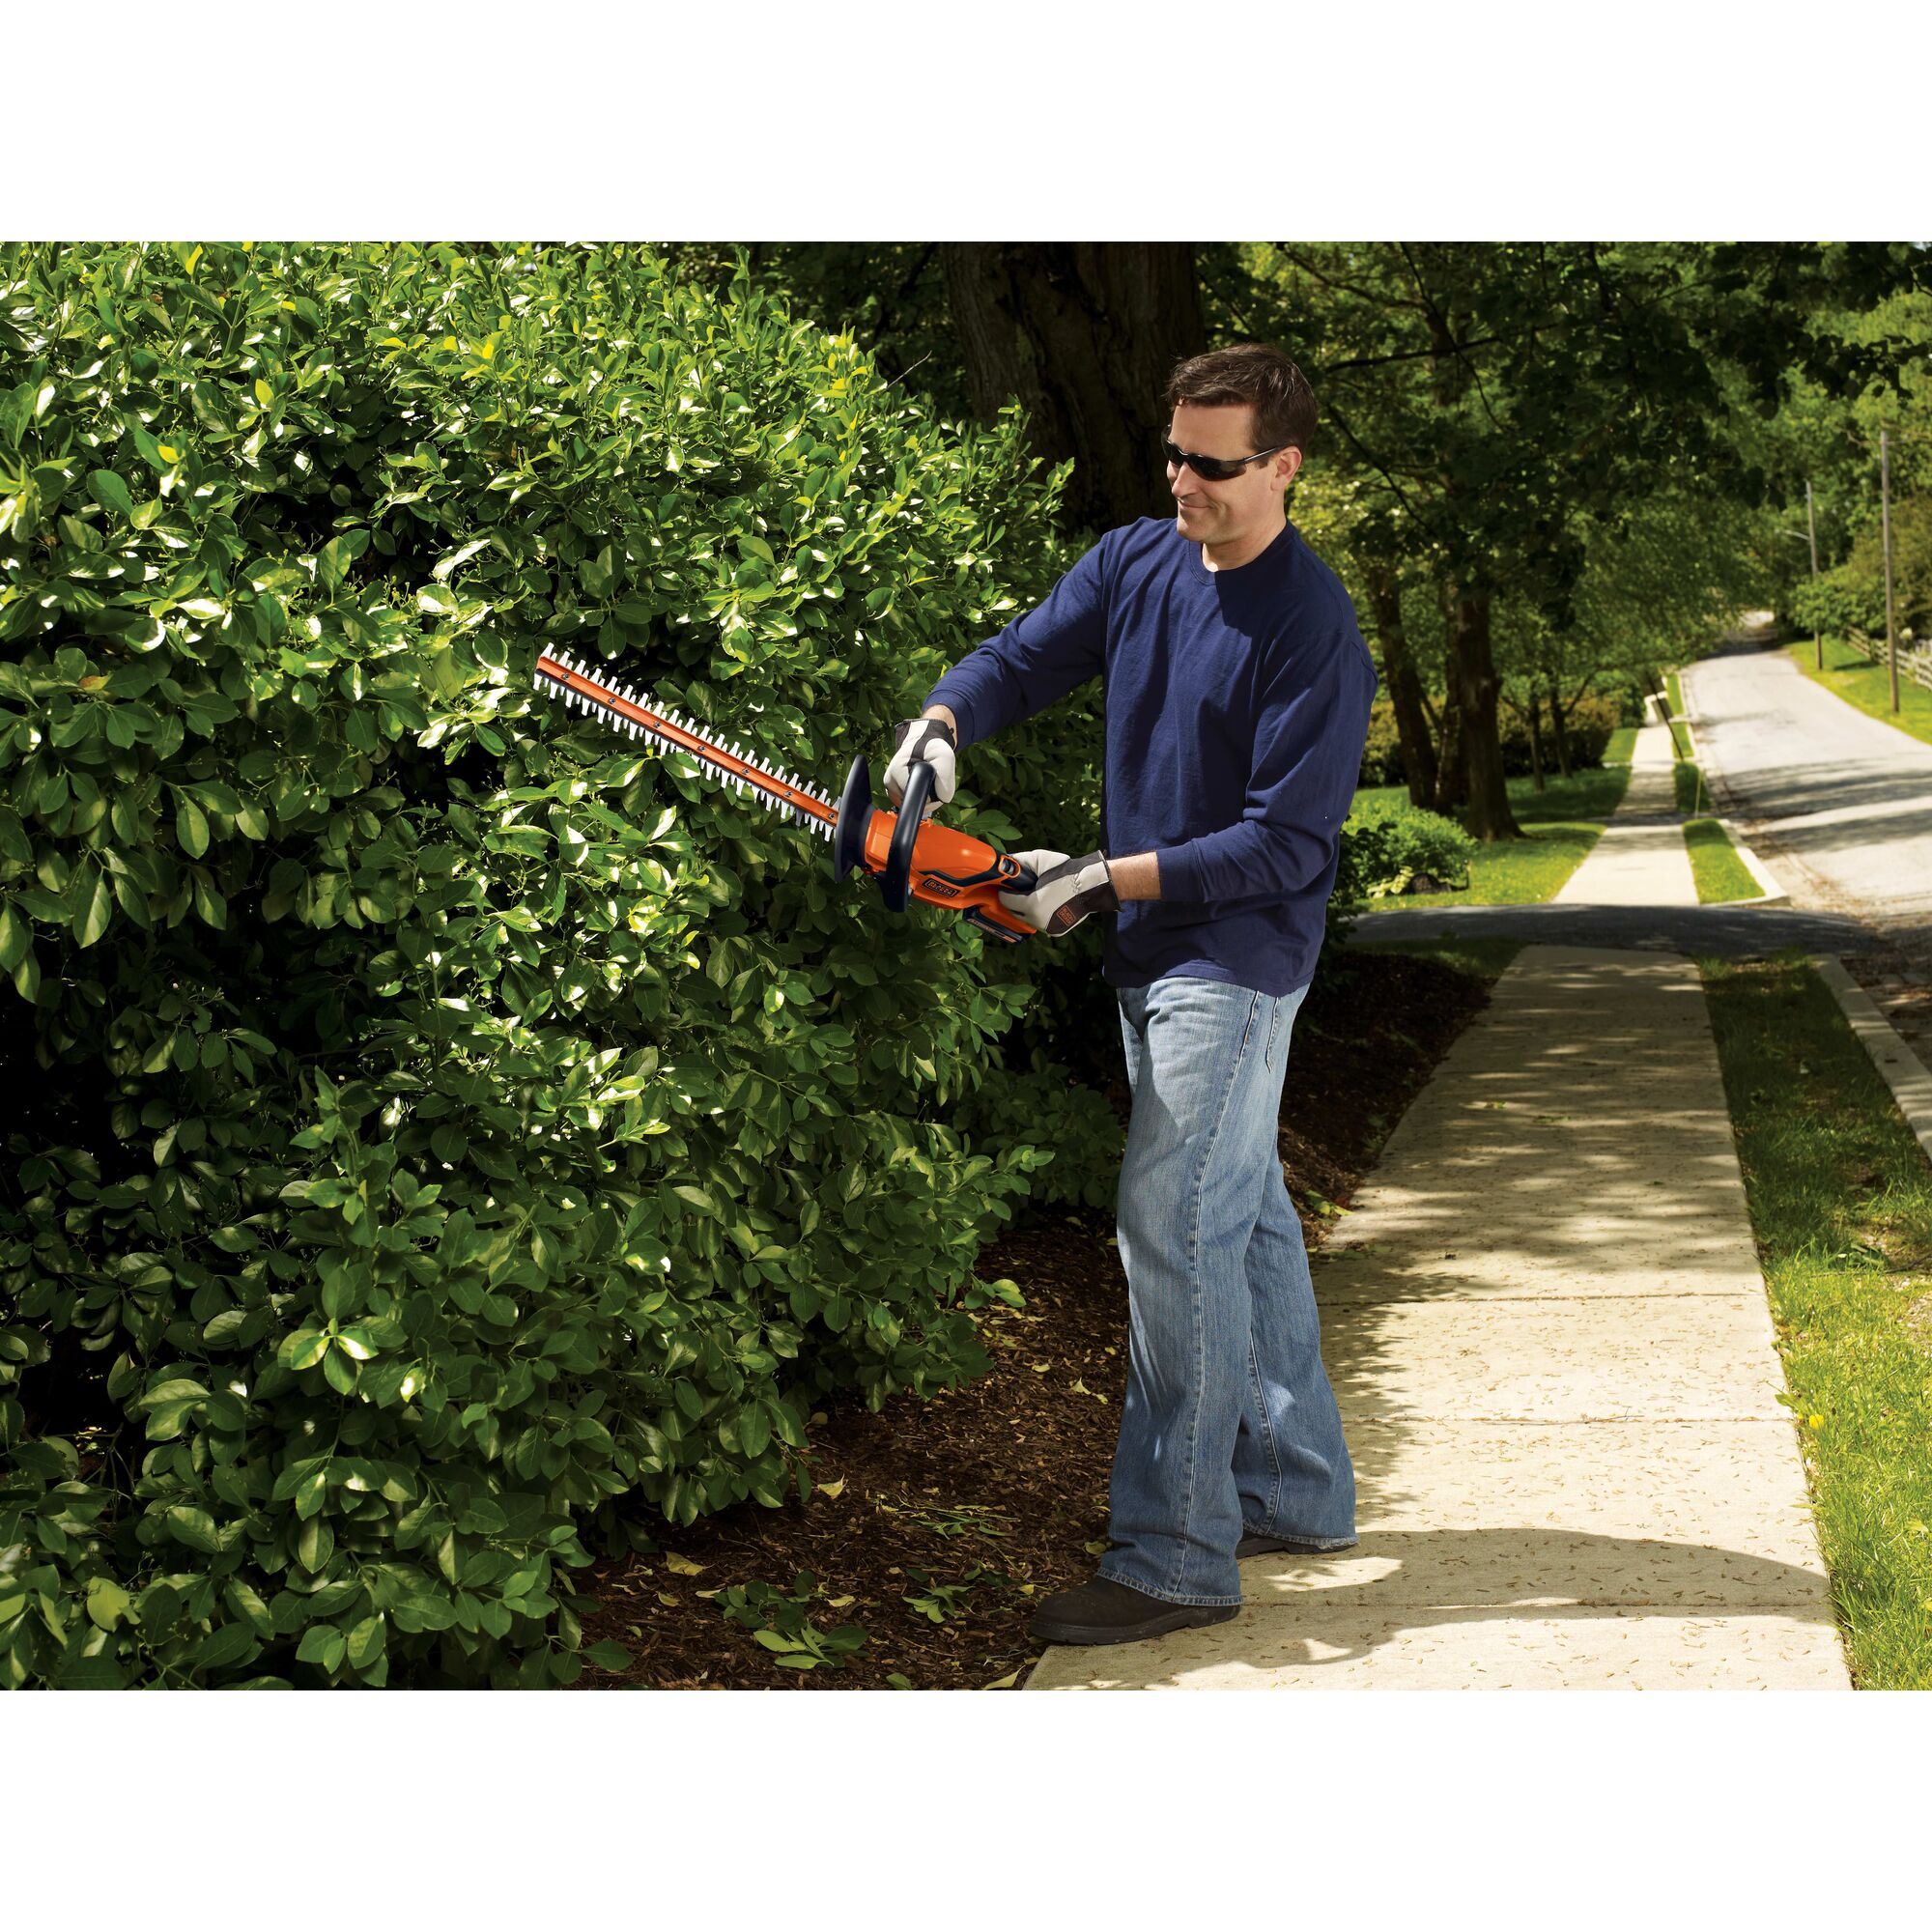 Lithium 22 inch Hedge Trimmer being used by person to trim bushes.